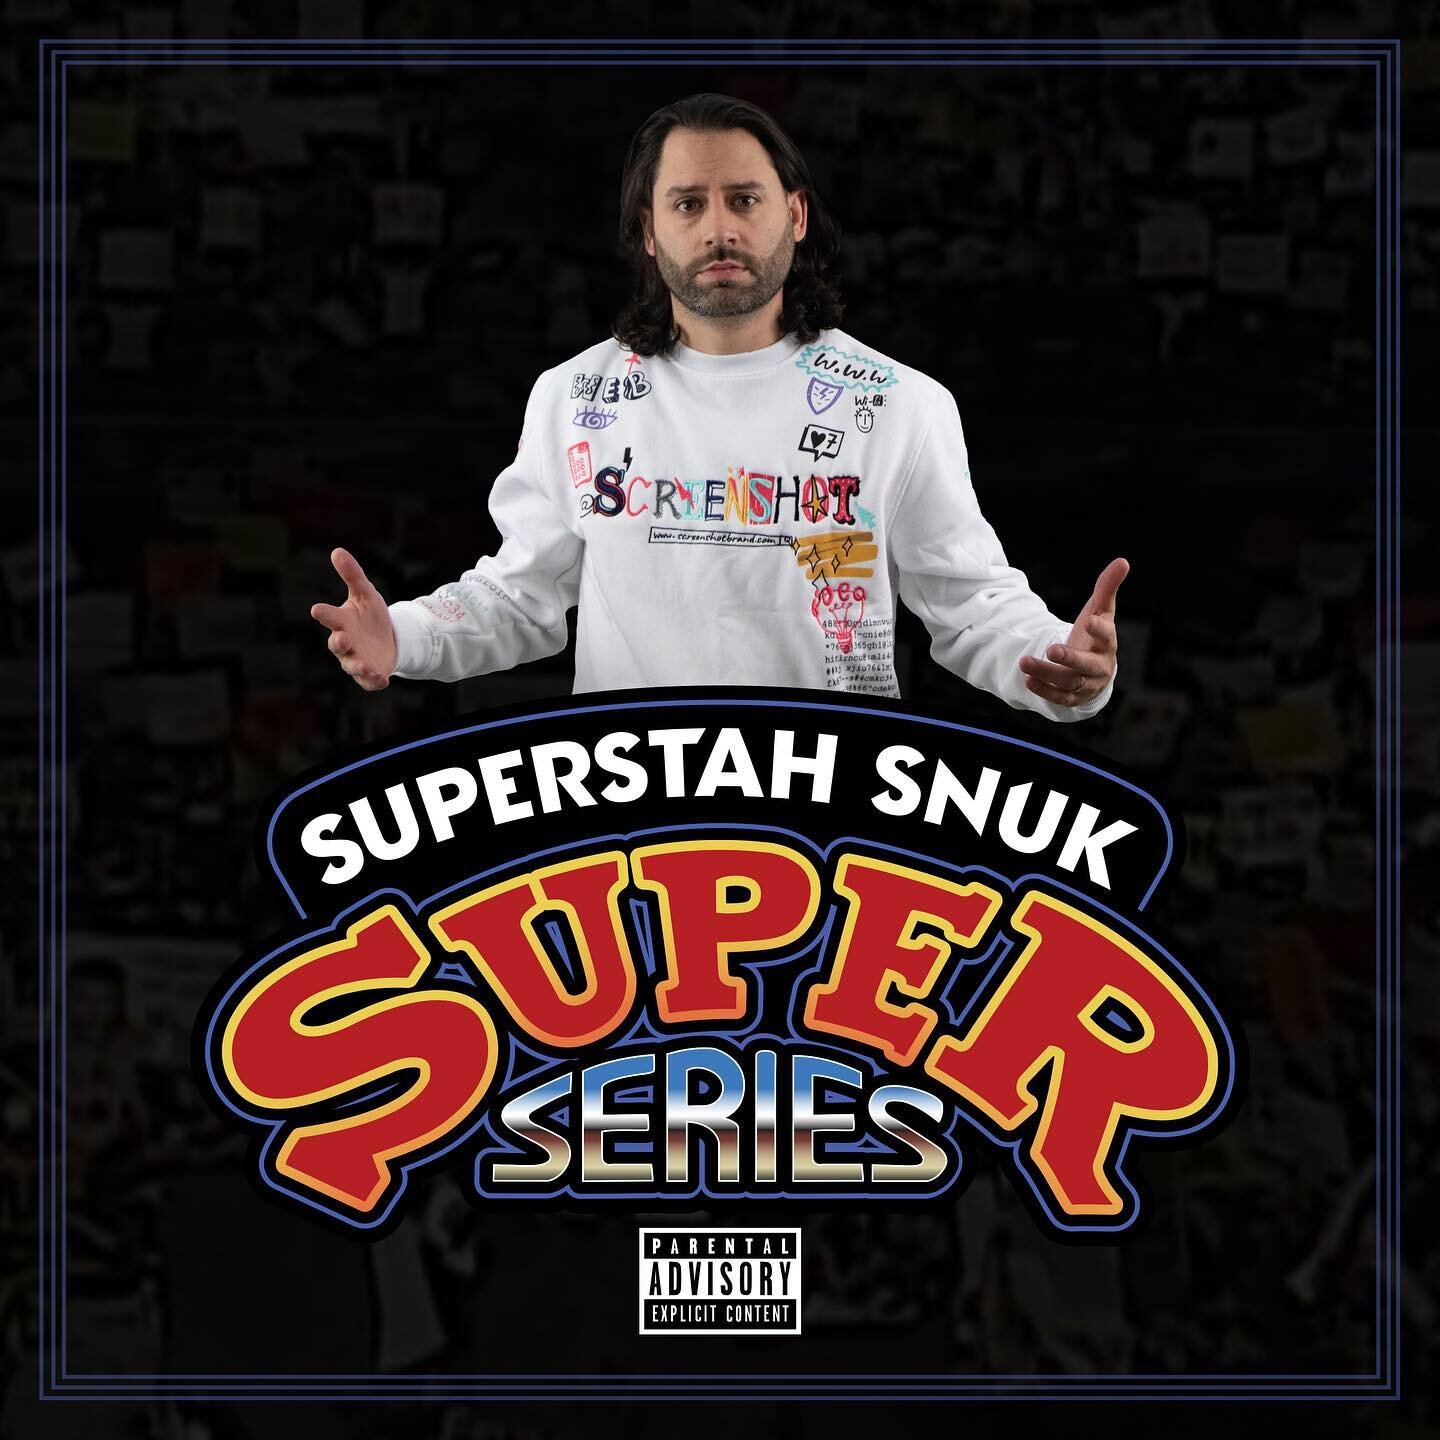 @superstahsnuk new EP &ldquo;Super Series&rdquo; out now! I had a great time working on this cover. It was a lot of fun to play with the 90&rsquo;s wrestling aesthetic. #newenglandhiphop #repnewengland #hiphop #graphicdesign #wrestling